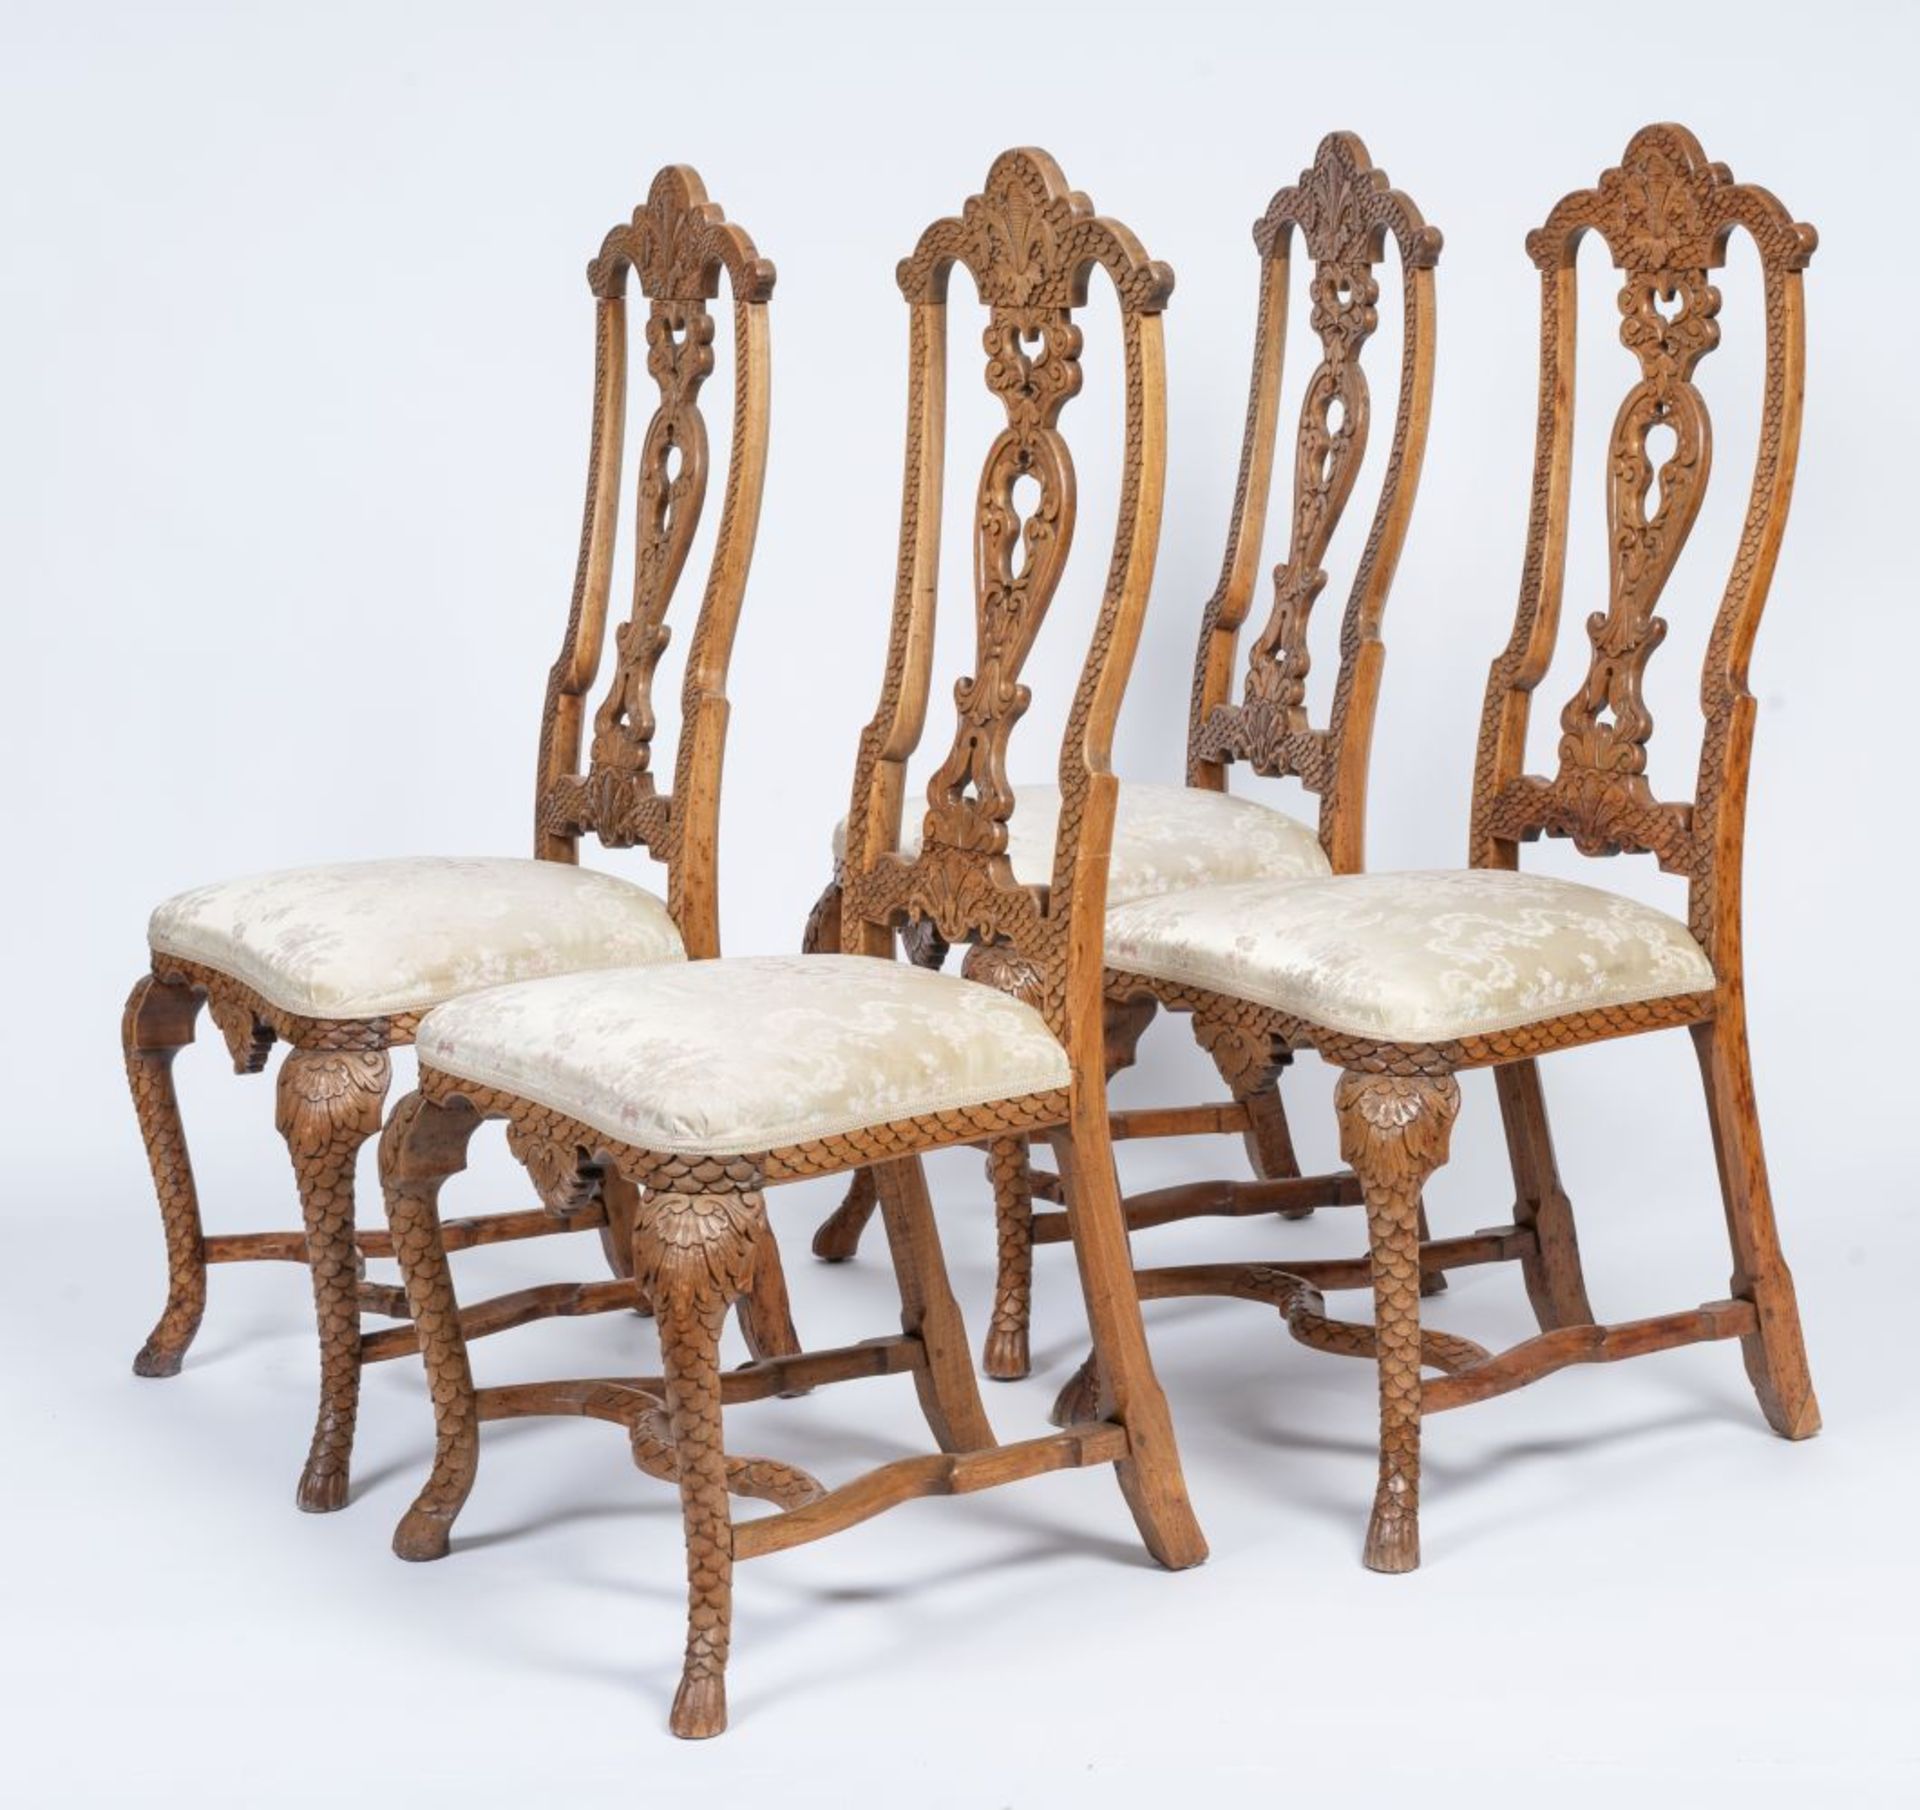 A Set of 4 Rococo Chairs with rare Scale Carving. - Image 3 of 4